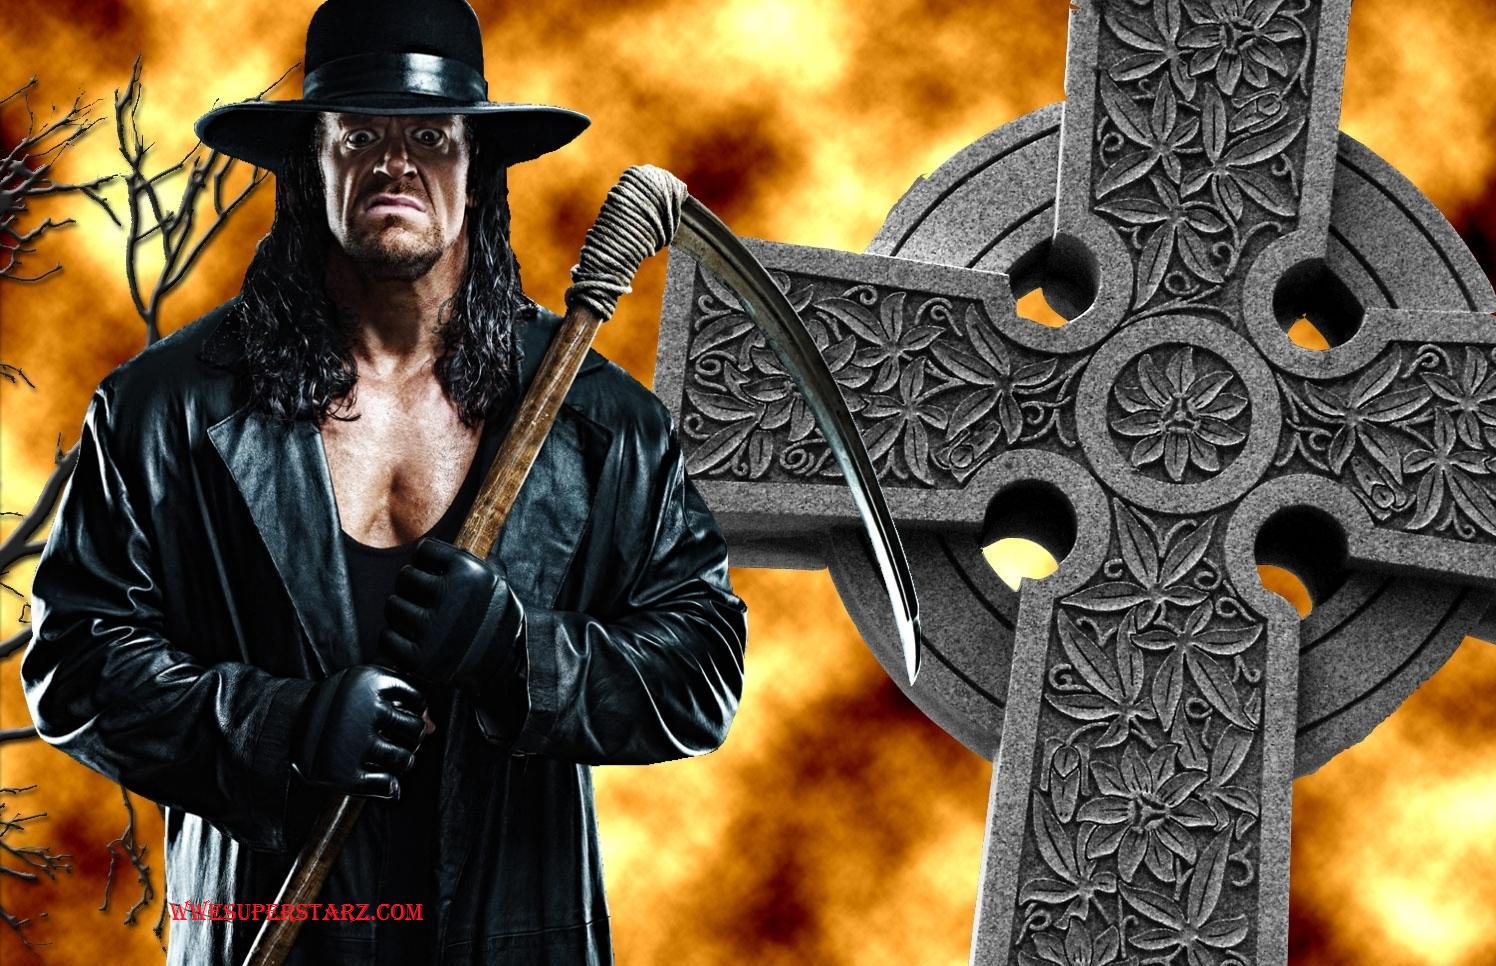 cool wwe wallpapers,fictional character,cross,games,illustration,magician